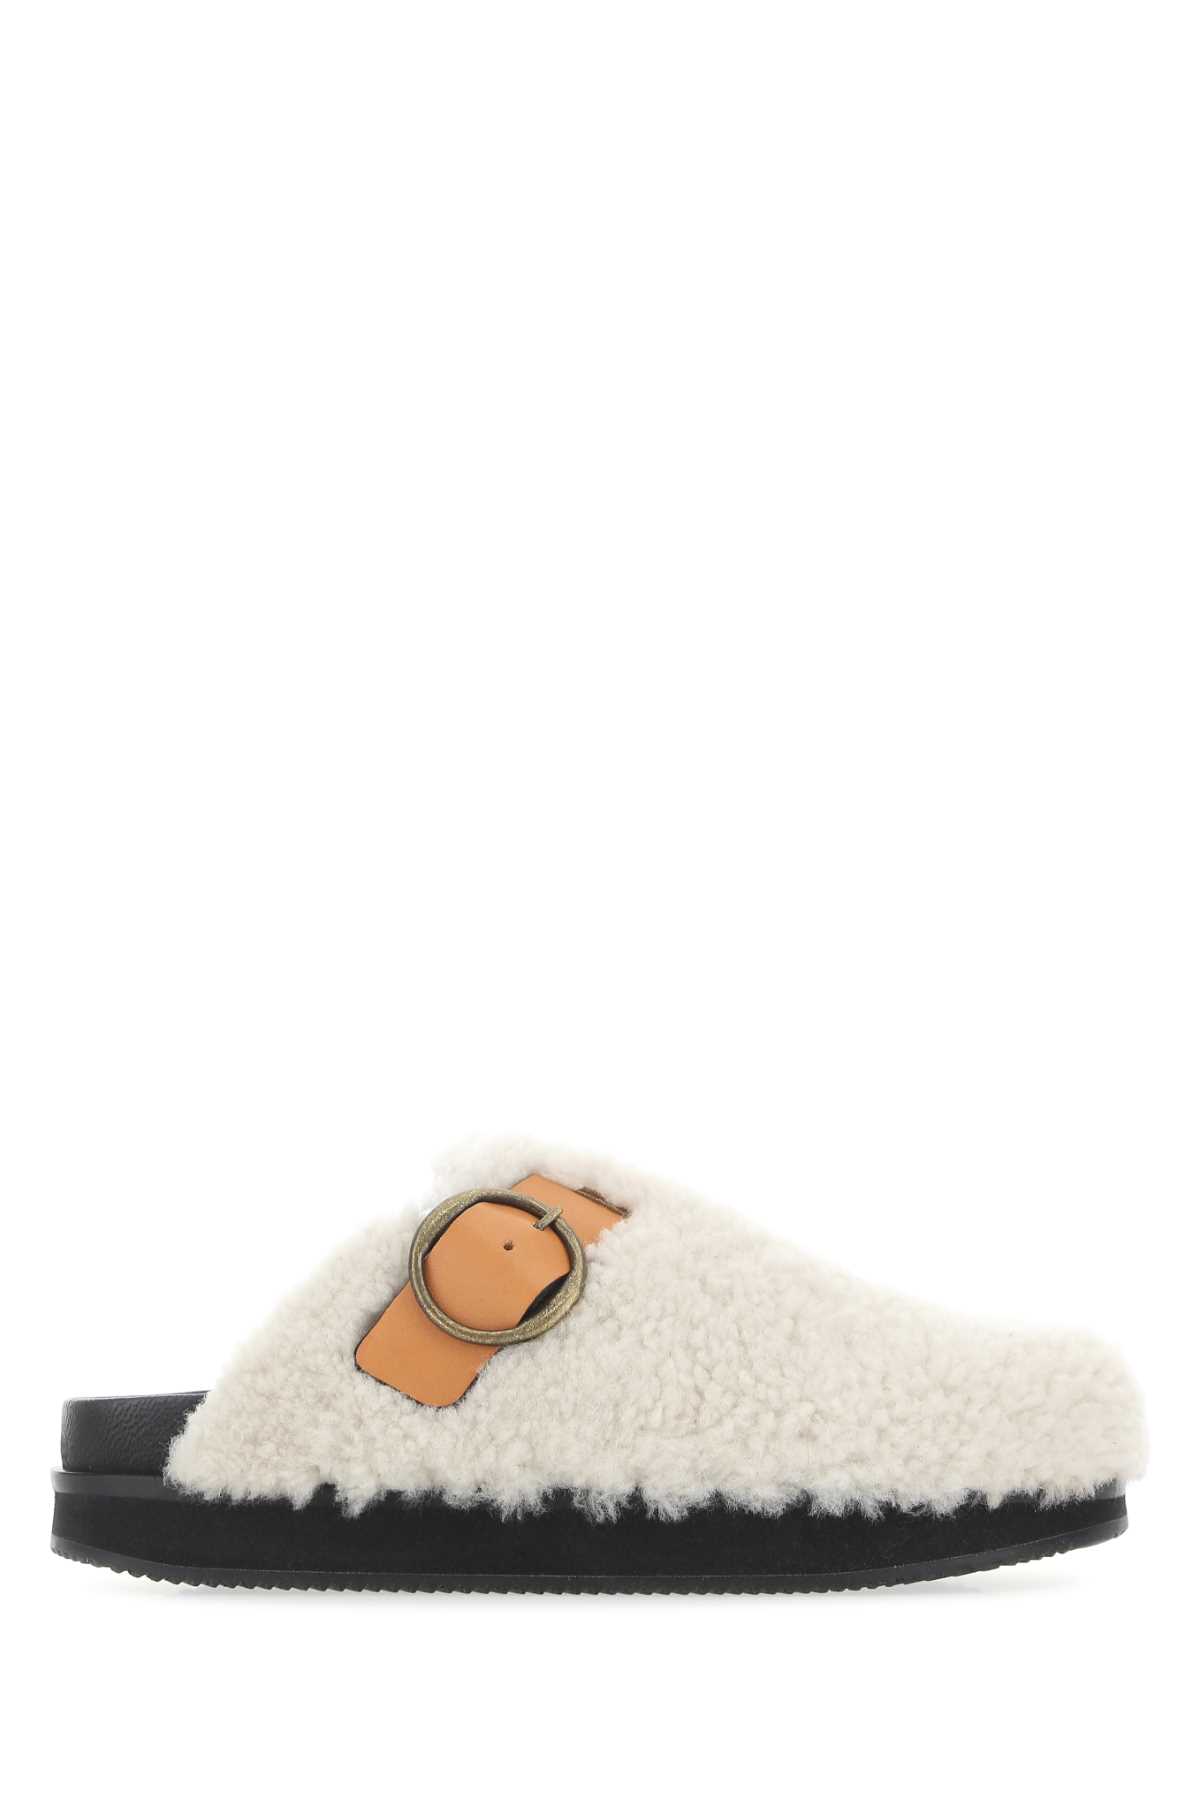 Ivory Shearling Footb Slippers